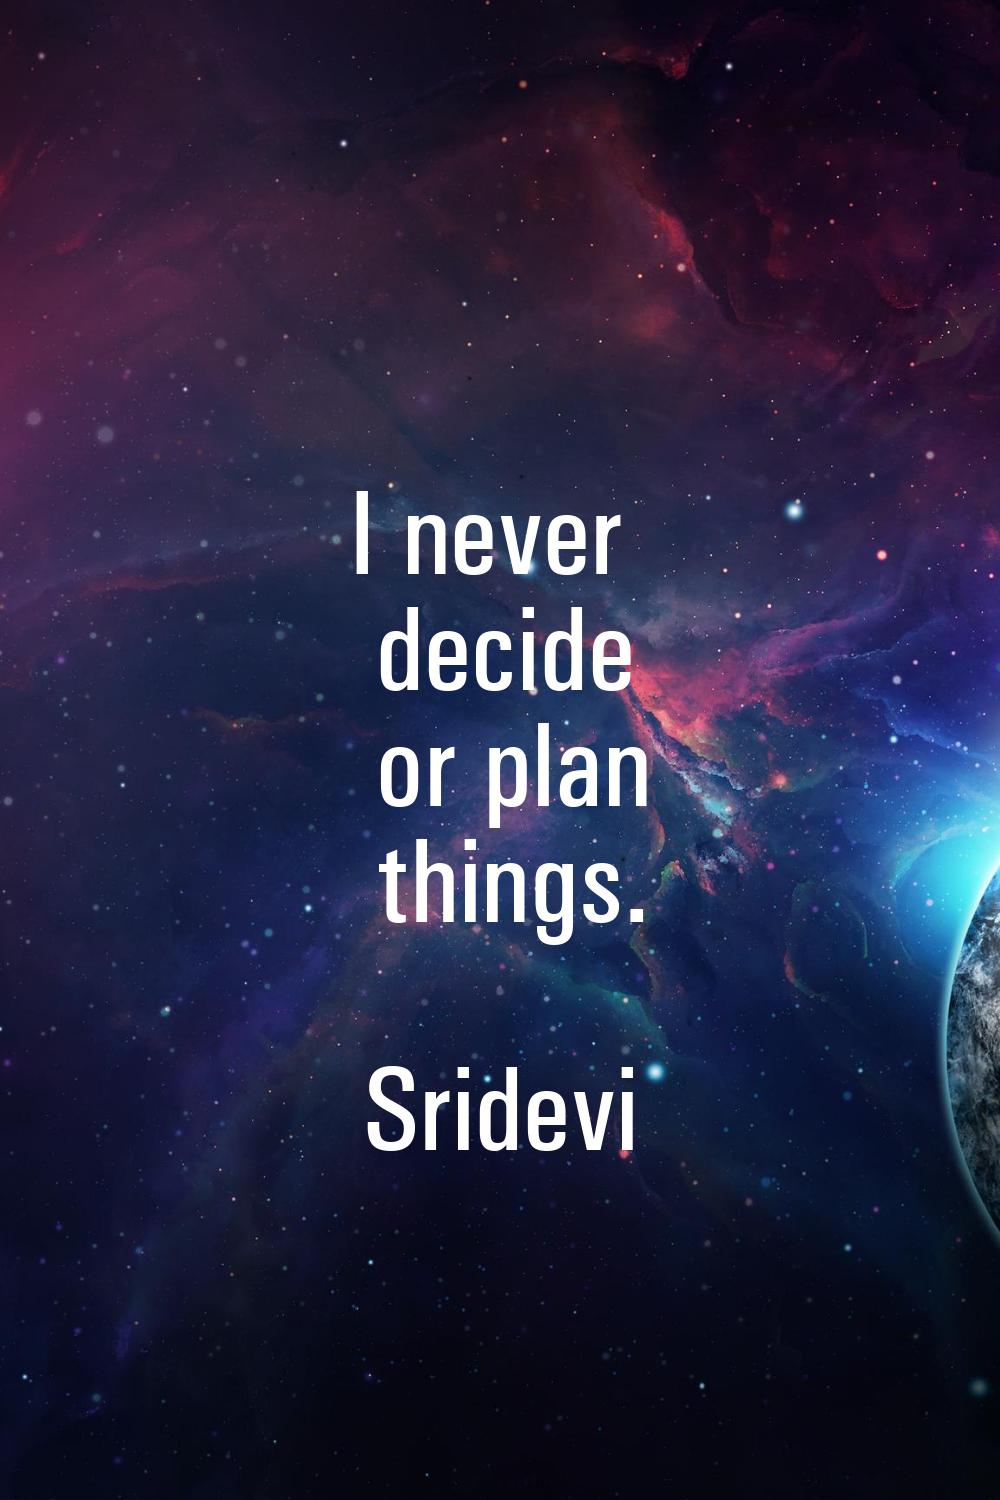 I never decide or plan things.